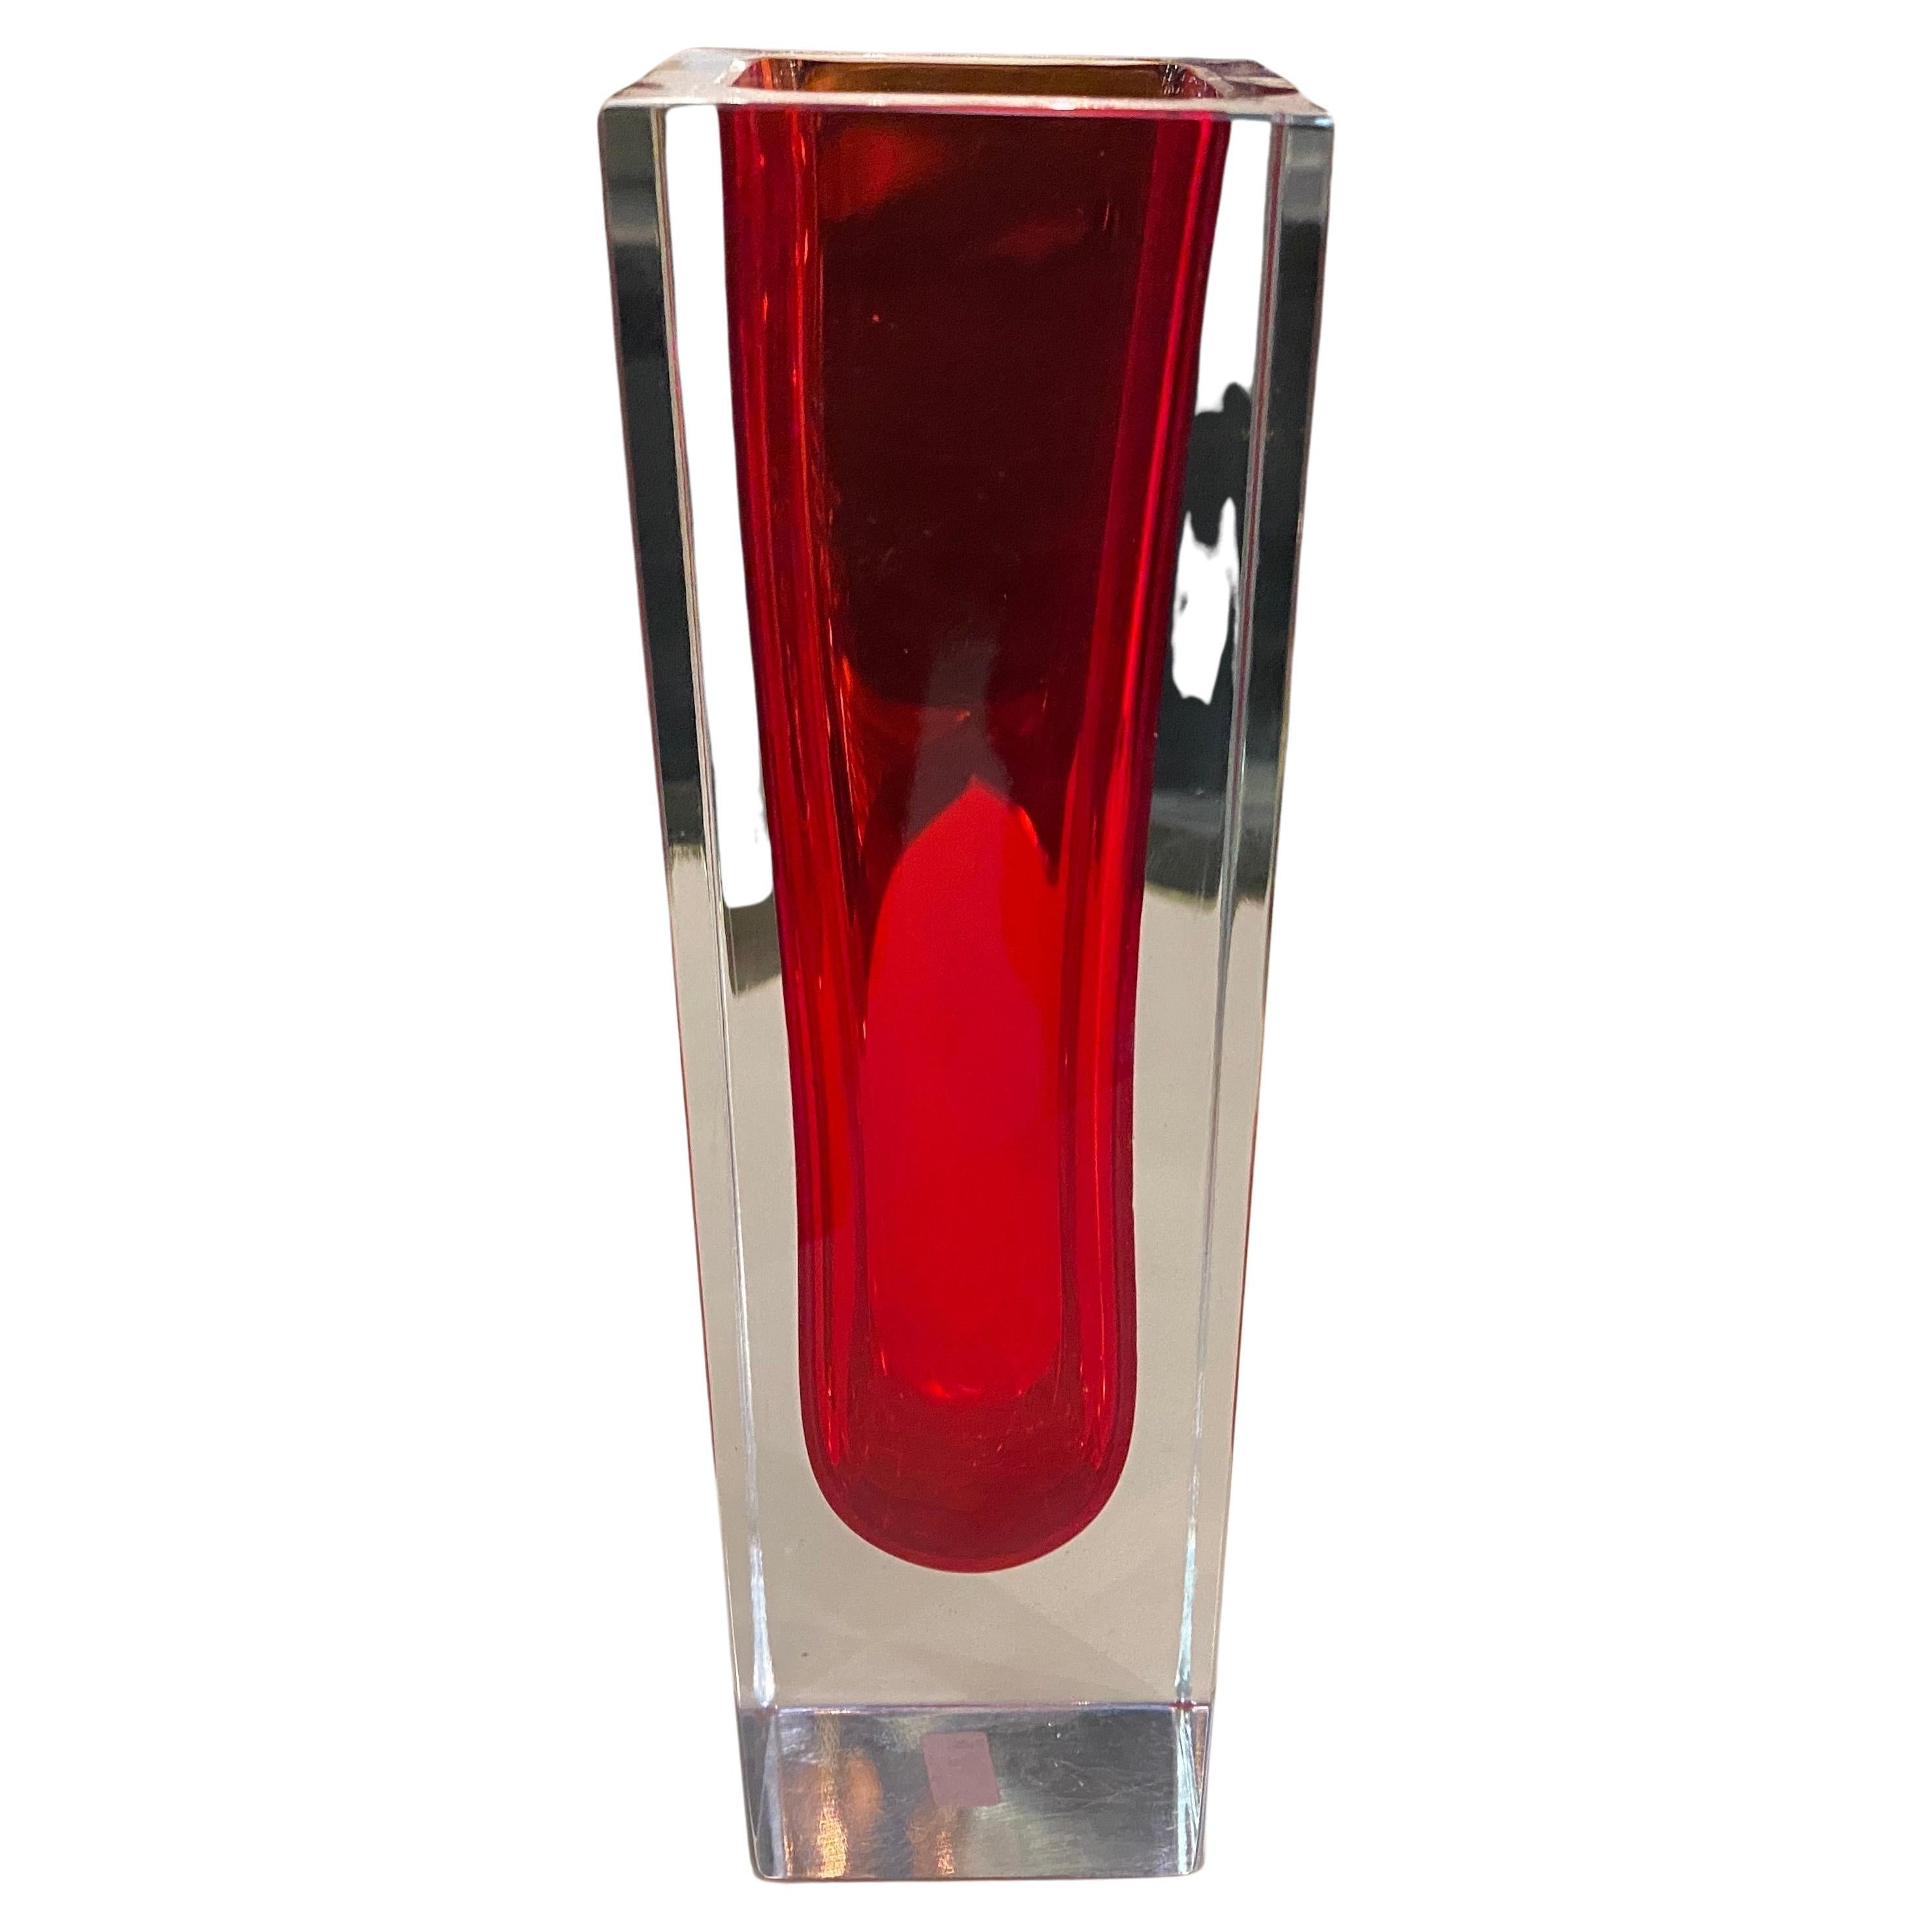 A modernist red heavy murano glass square vase designed and manufactured in Italy by Mandruzzato. The vase it's in perfect conditions. Mandruzzato was an Italian glass company that produced high-quality glassware in the Murano tradition from the